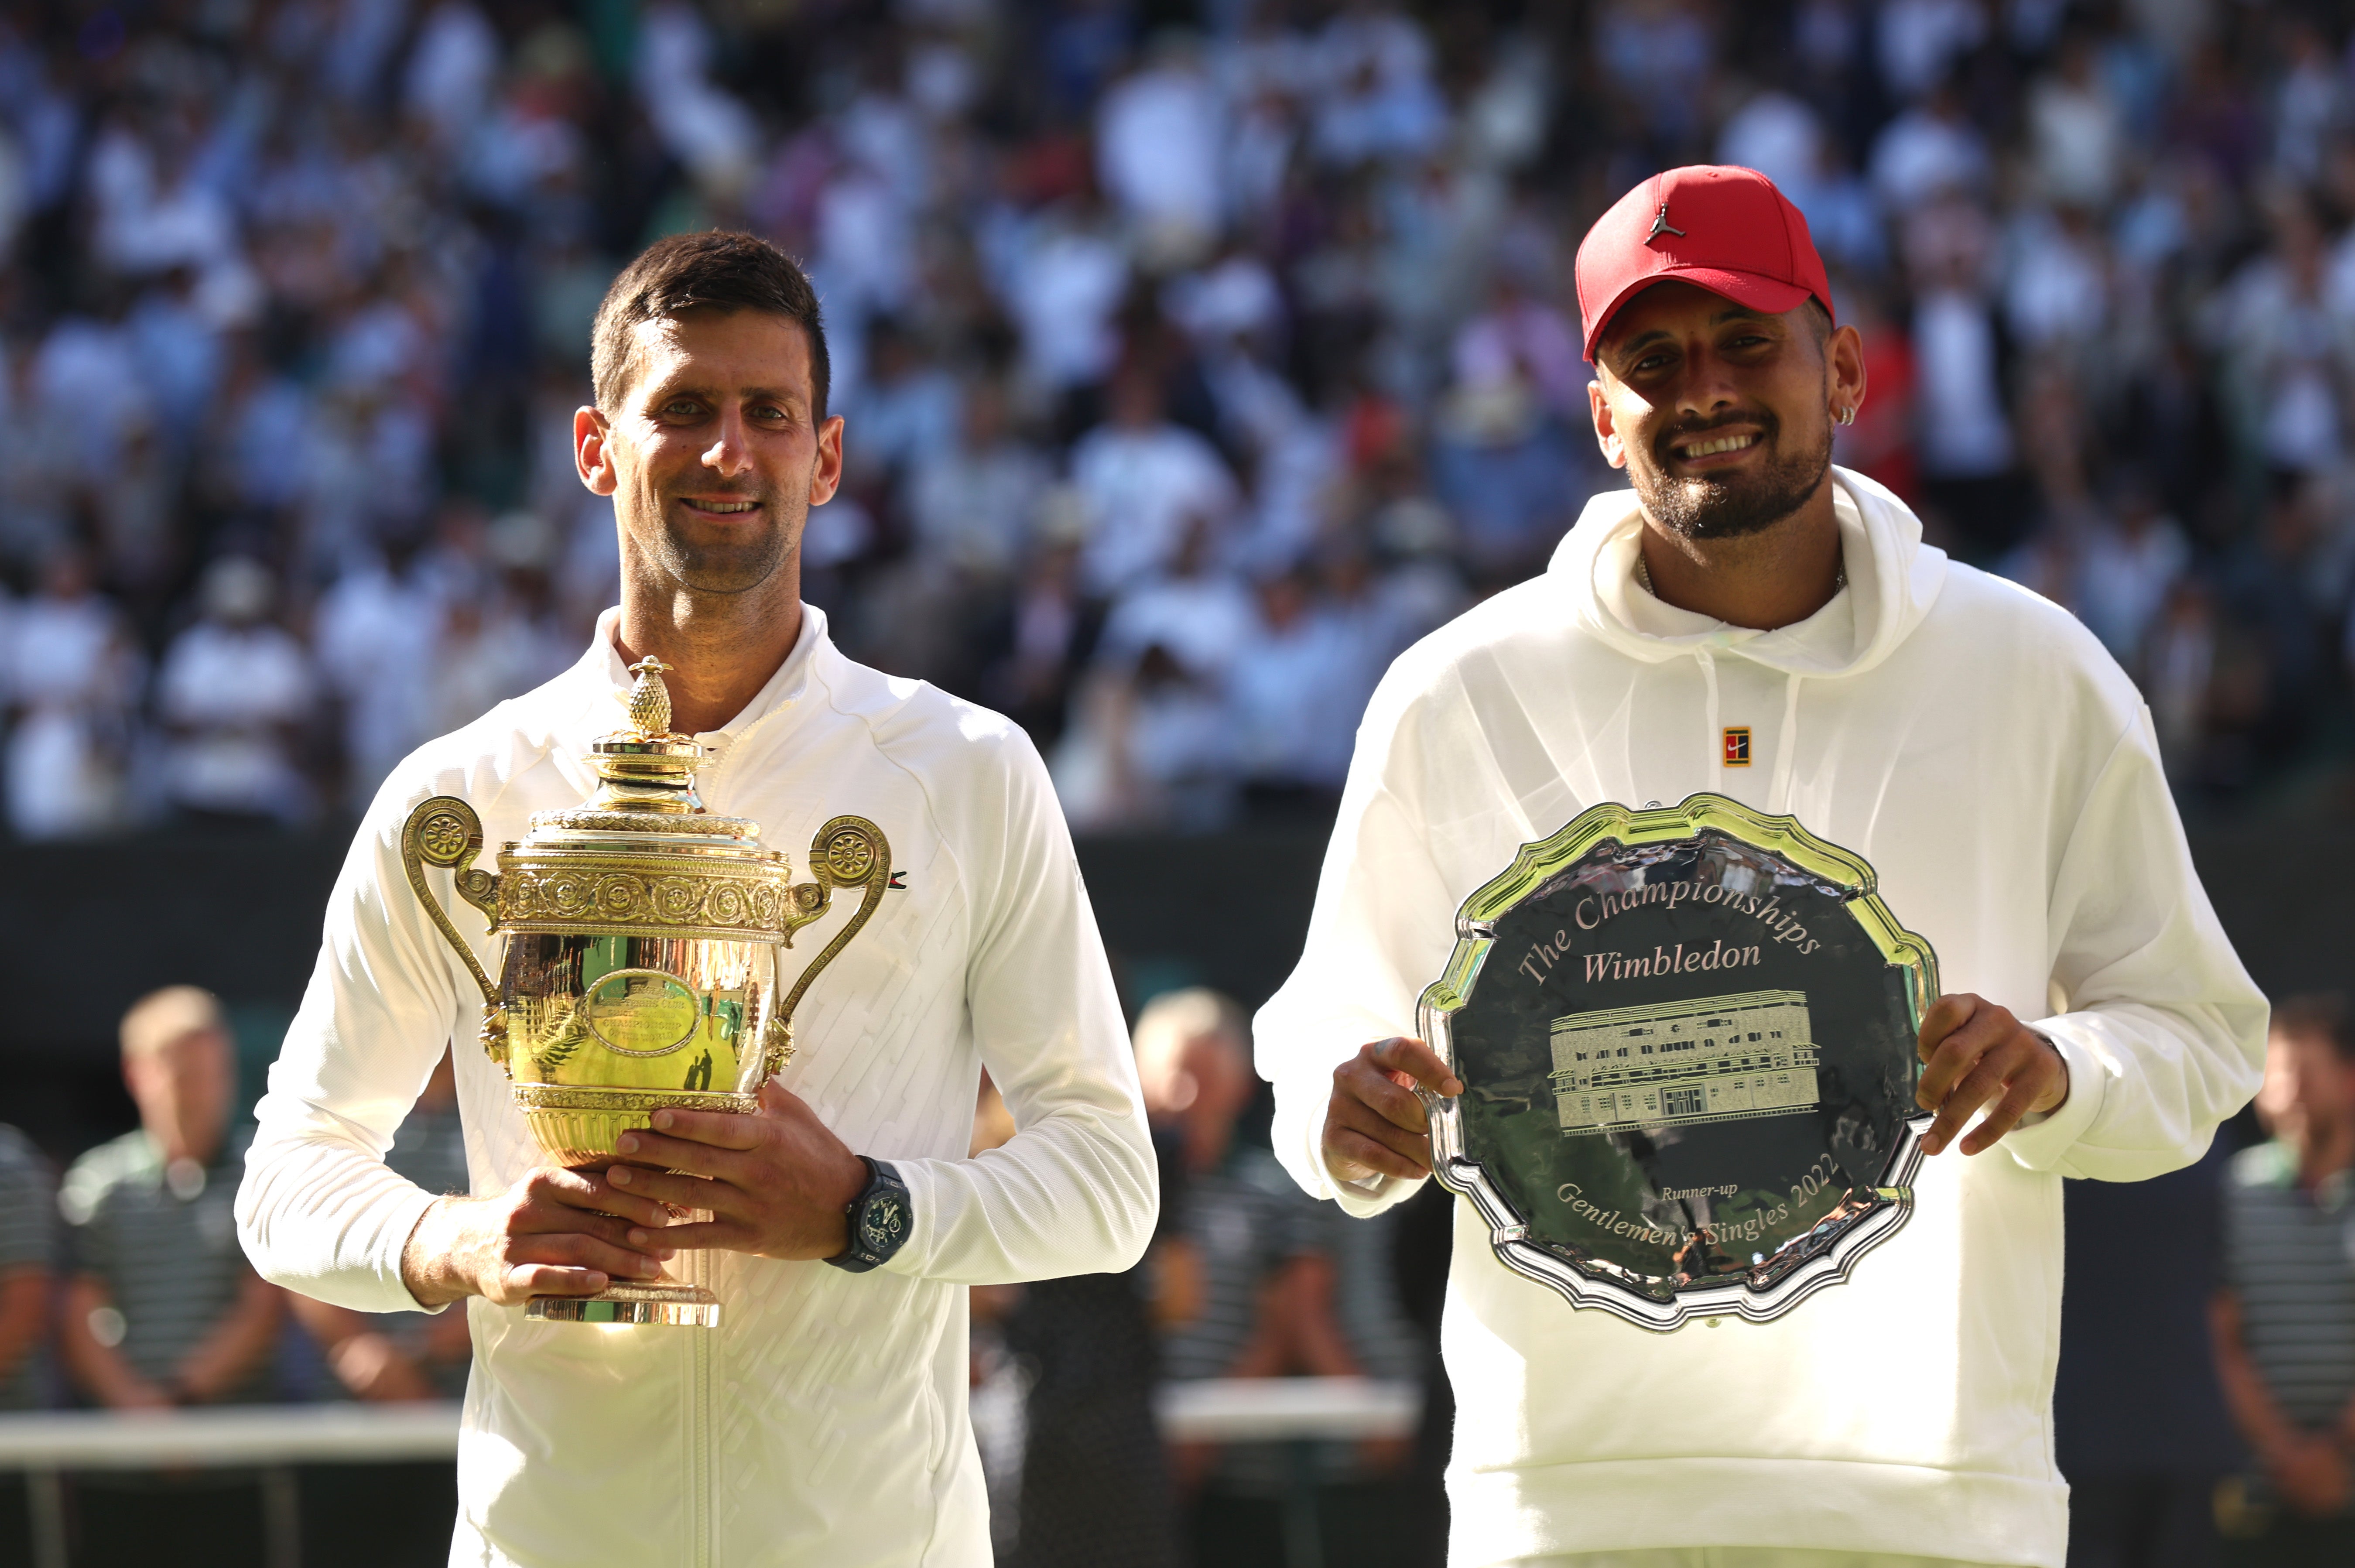 Kyrgios constantly grabs and demands your attention – and it took Djokovic unlocking a new level of mental resilience to avoid becoming distracted